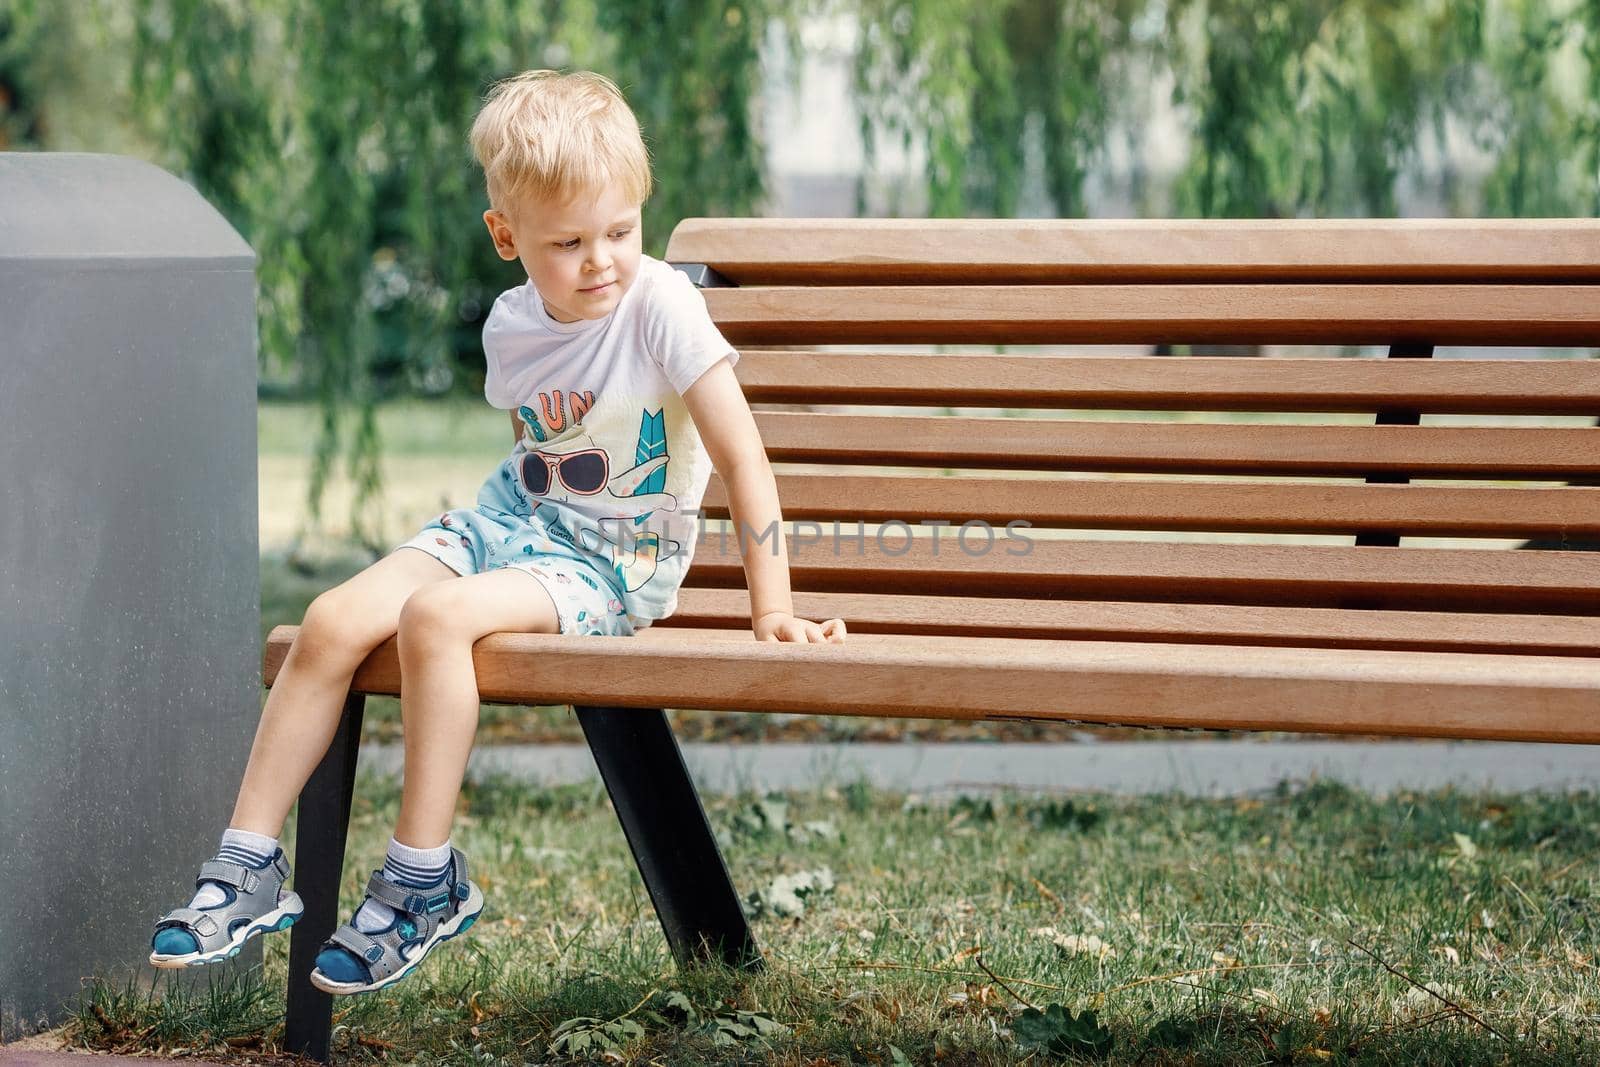 Small child plays in park, climbs onto bench. Kid is sitting on a park bench.